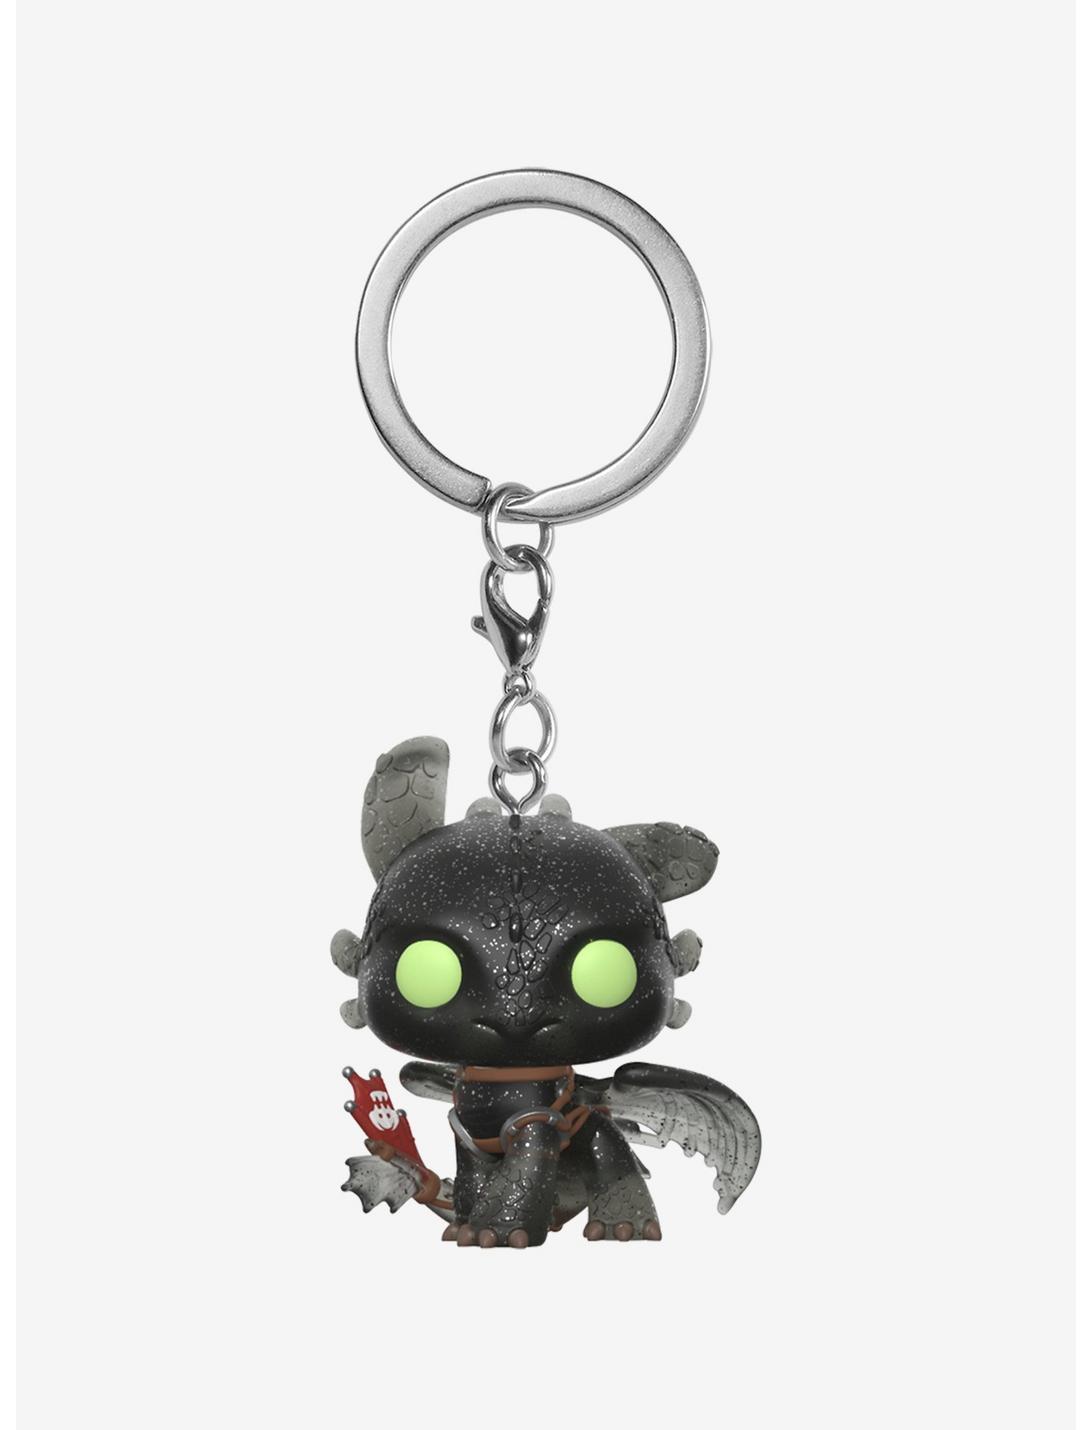 Funko How To Train Your Dragon Pocket Pop! Toothless Diamond Collecton Vinyl Key Chain Hot Topic Exclusive, , hi-res